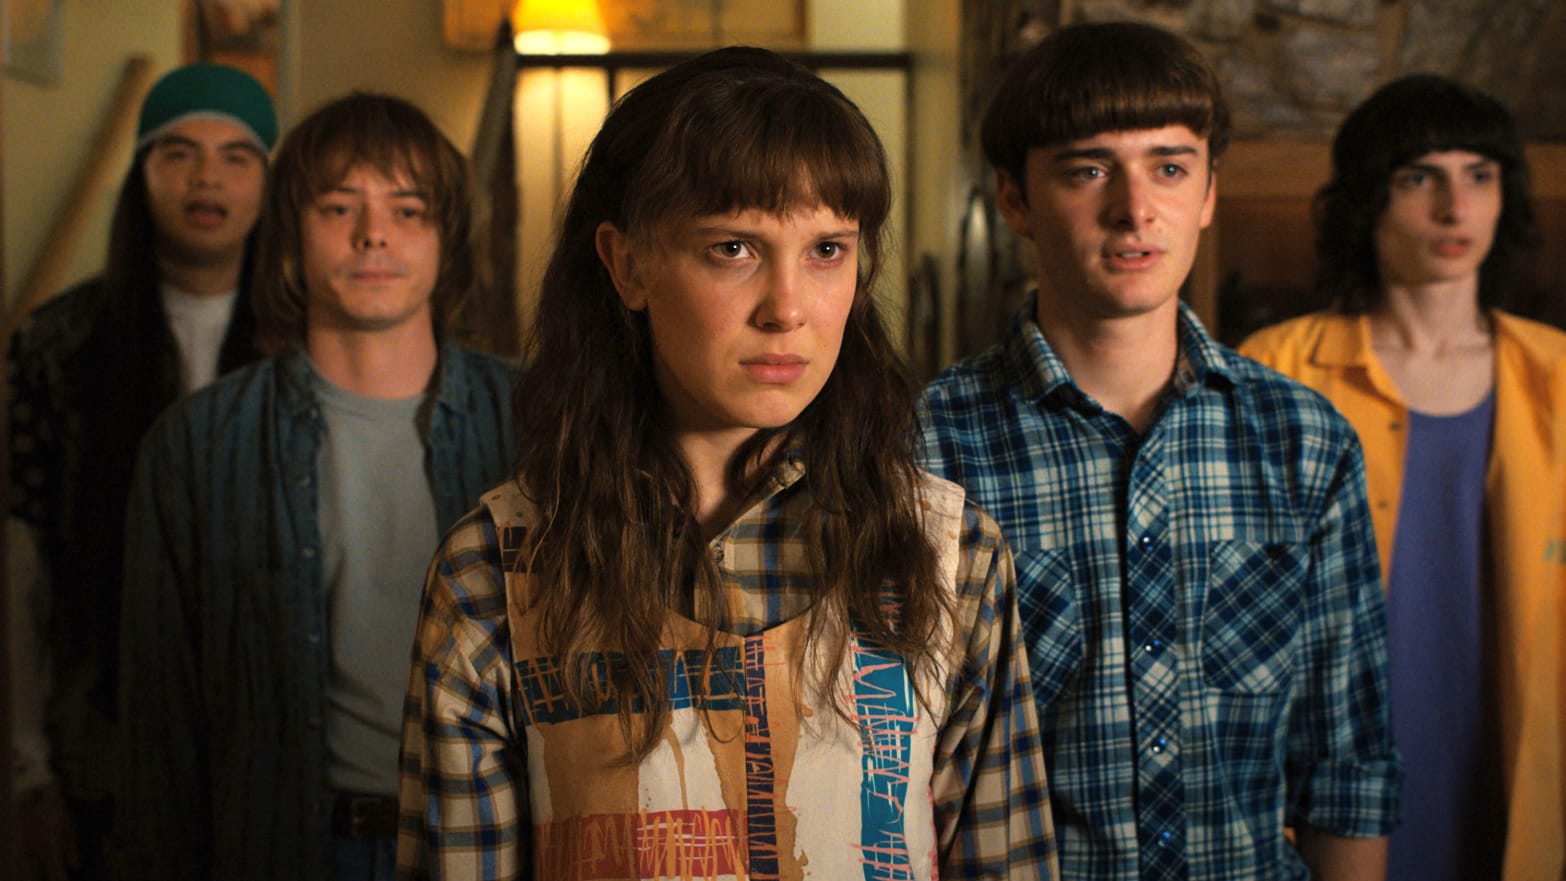 Stranger Things Day 2022: Our Complete Preview Guide - About Netflix